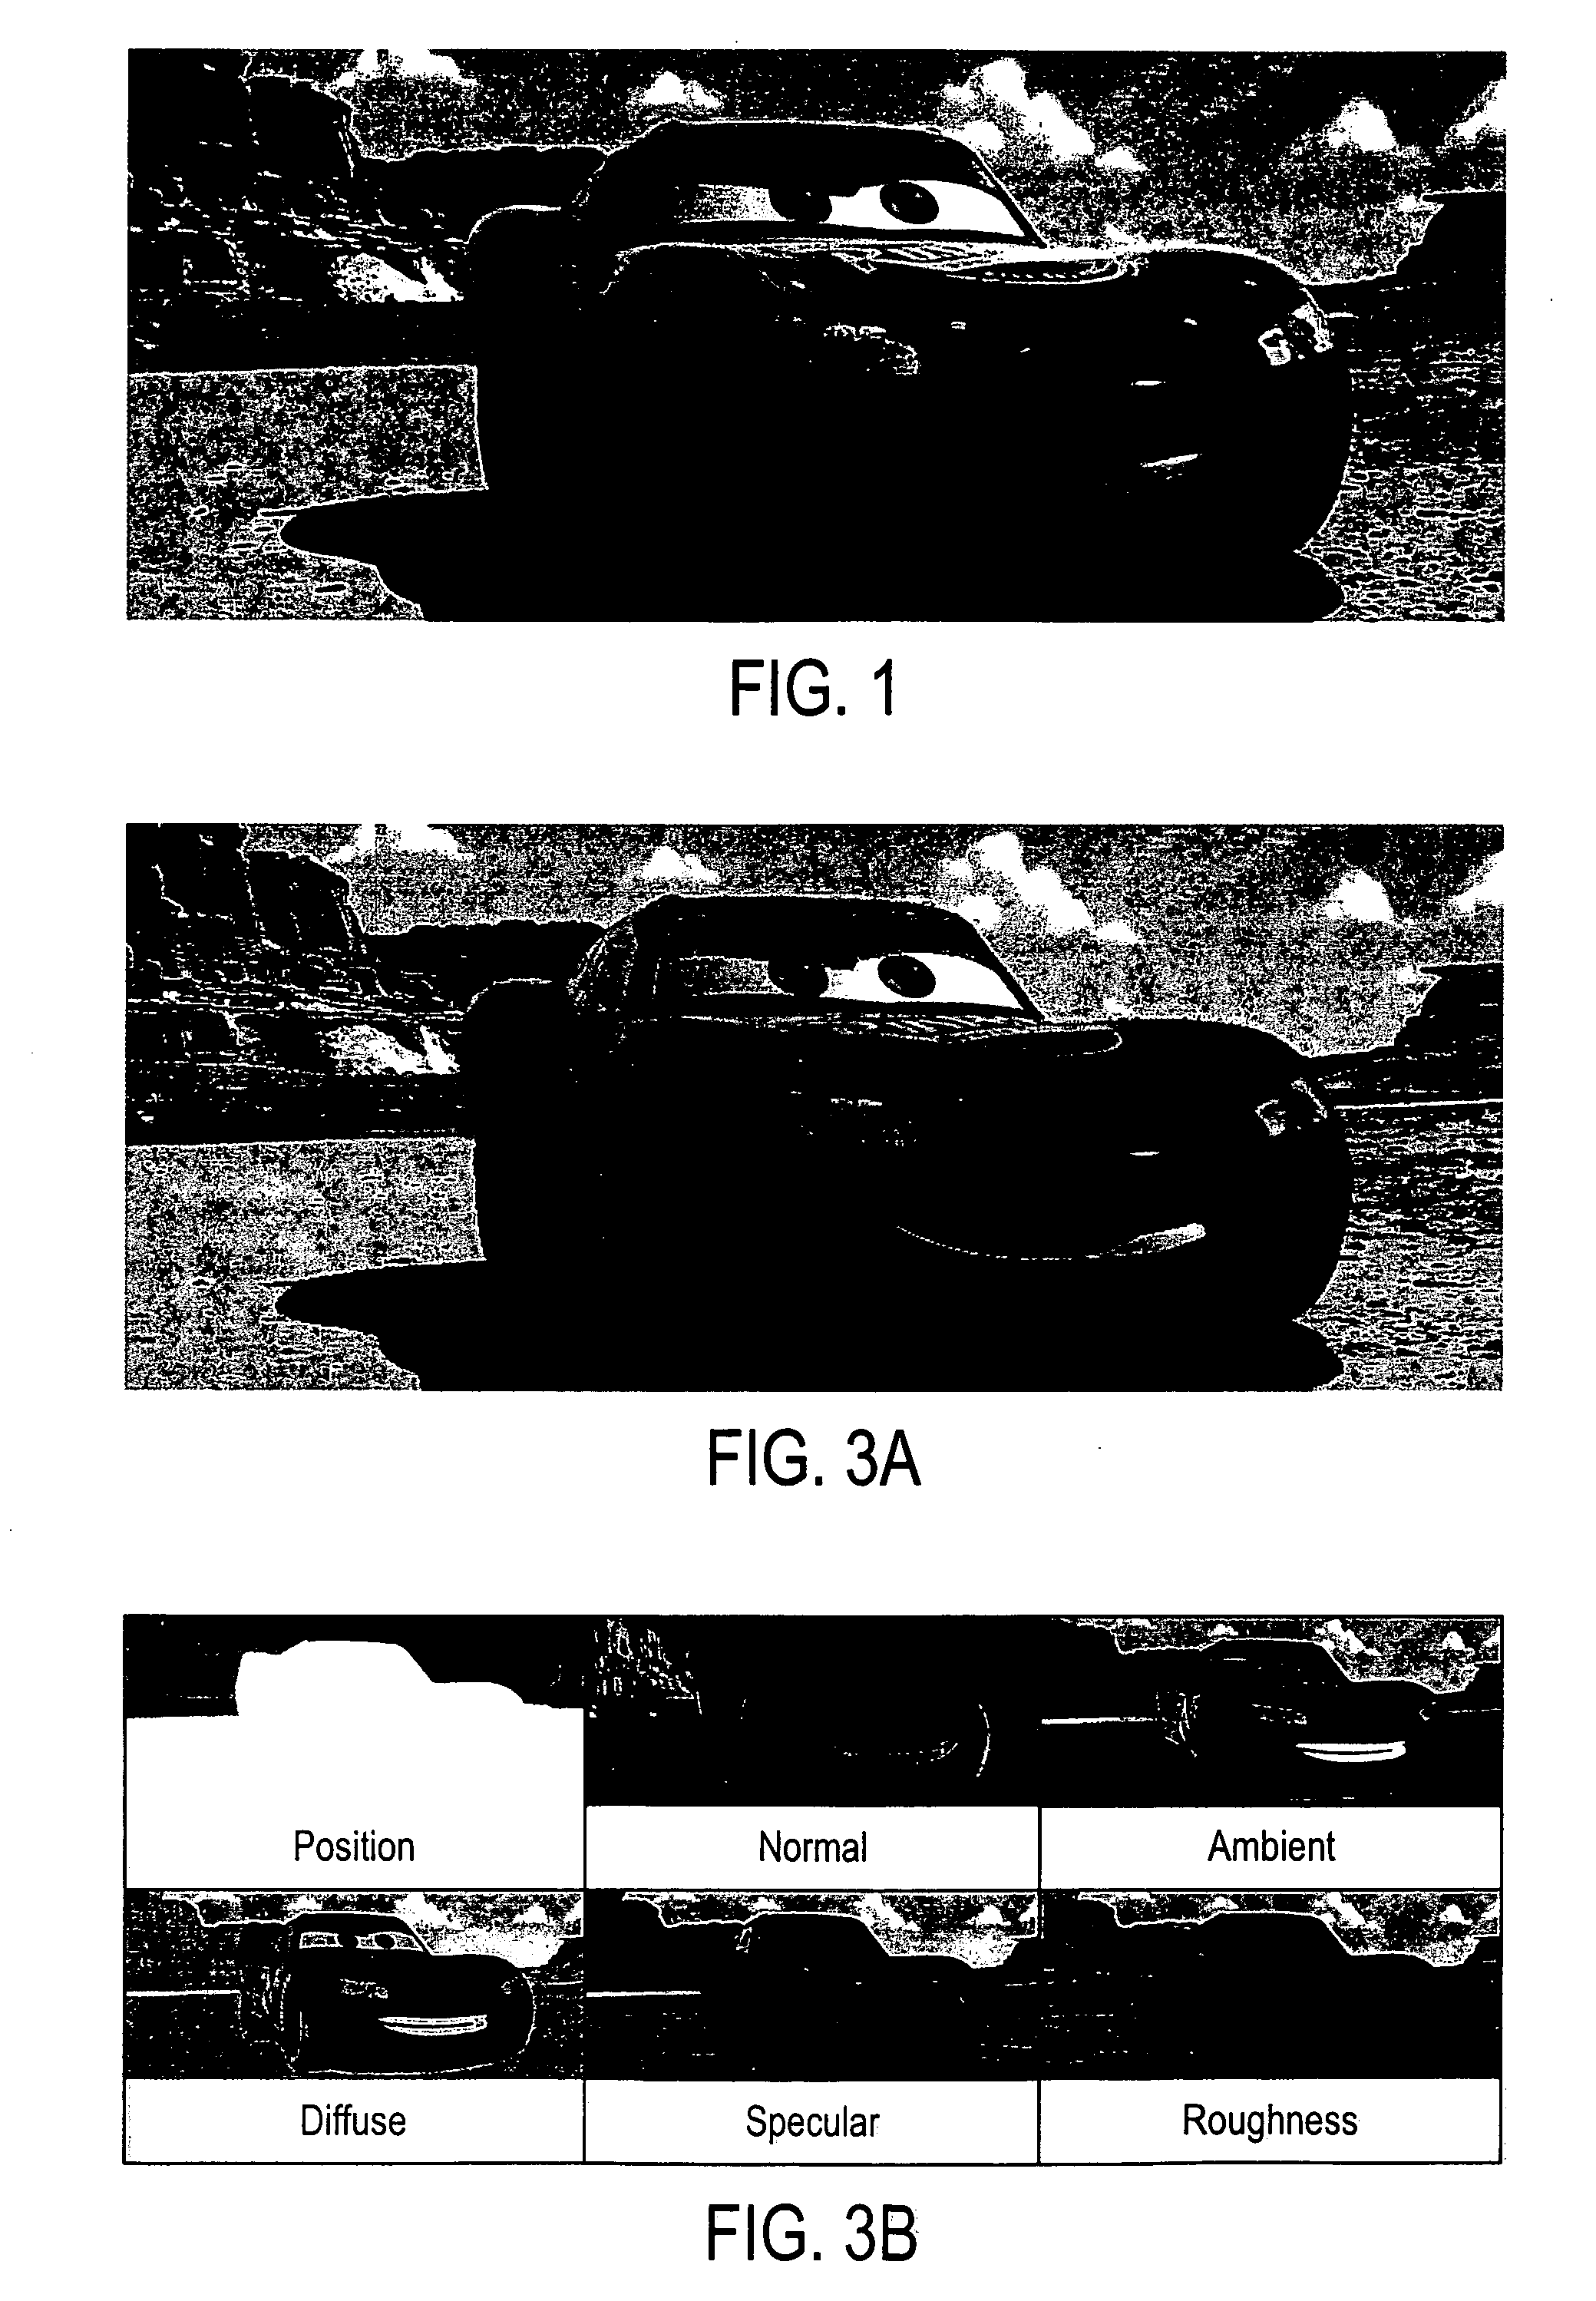 Hybrid hardware-accelerated relighting system for computer cinematography